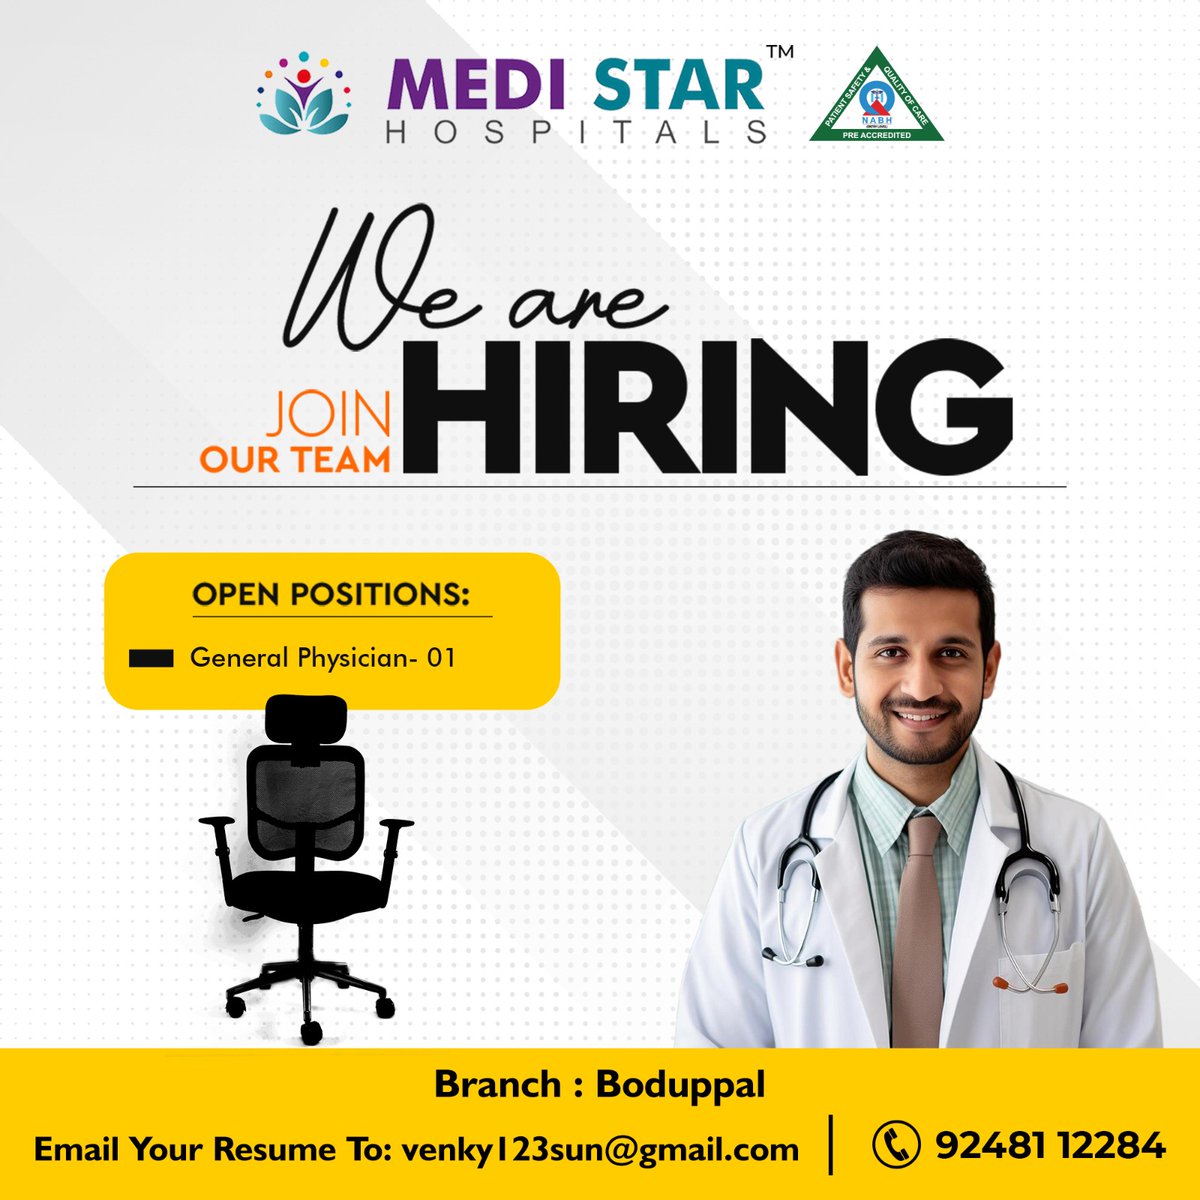 Looking for a skilled general physician to join our team at Medistar Hospital's Boduppal branch.   Join us in delivering top-notch medical care in a supportive environment.

#GeneralPhysician #Docterjob #Jobs2024 #Recruitment2024 #Hospital #Hospitaljobs #Hyderabad #Boduppal